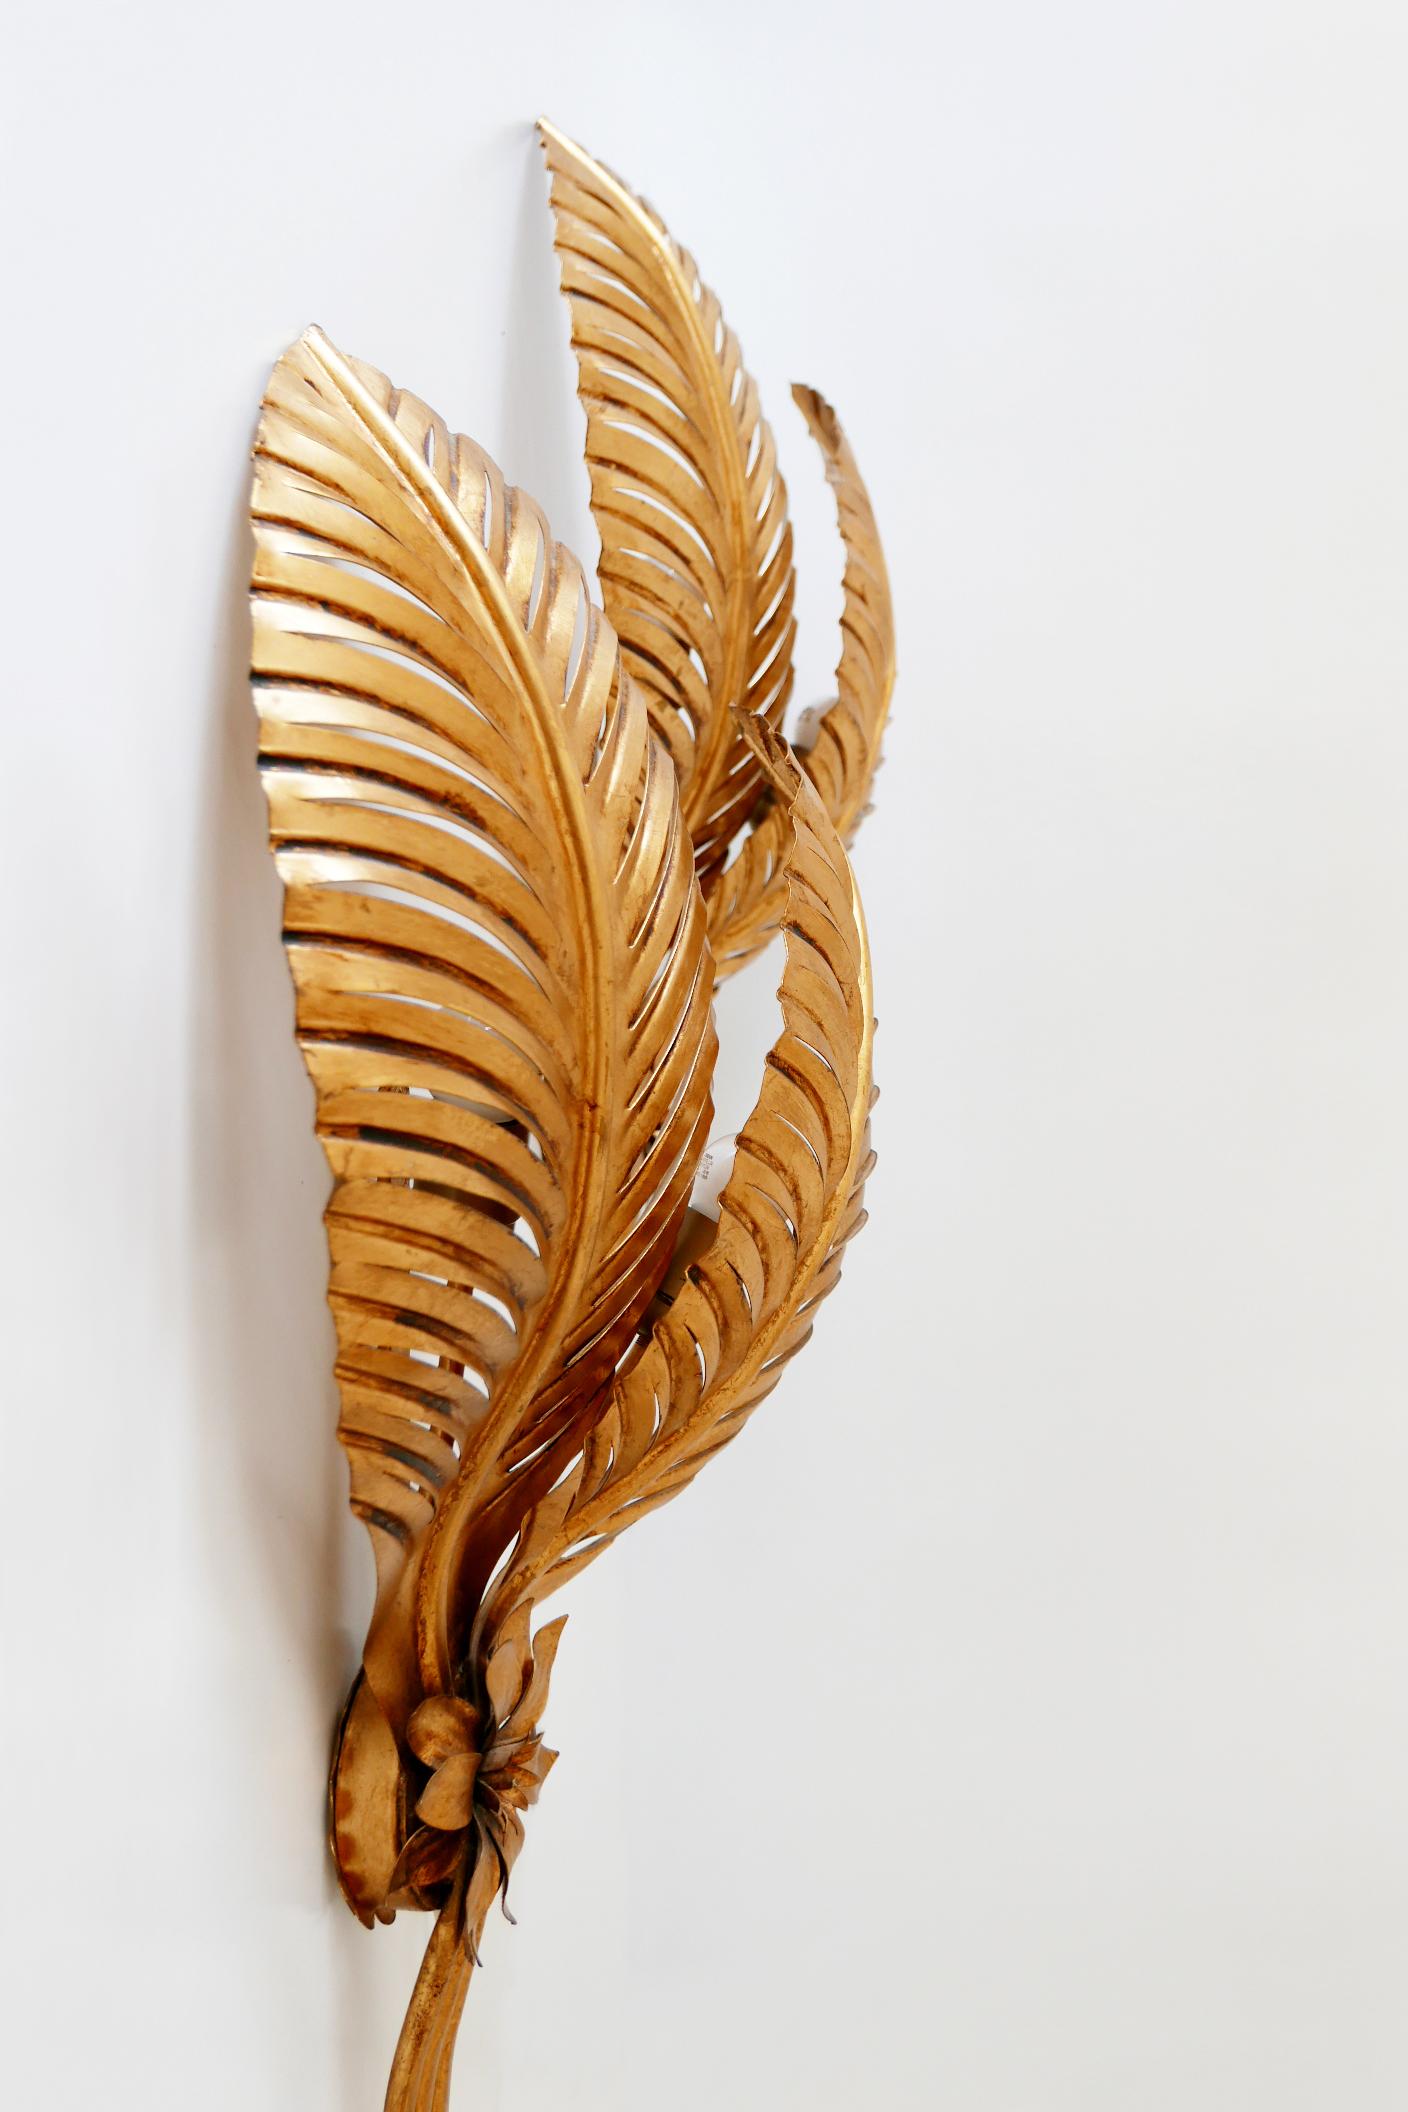 Set of Two Extra Large Gilt Metal Palm Leaf Wall Lamps, Hans Kögl, 1970s Germany For Sale 8